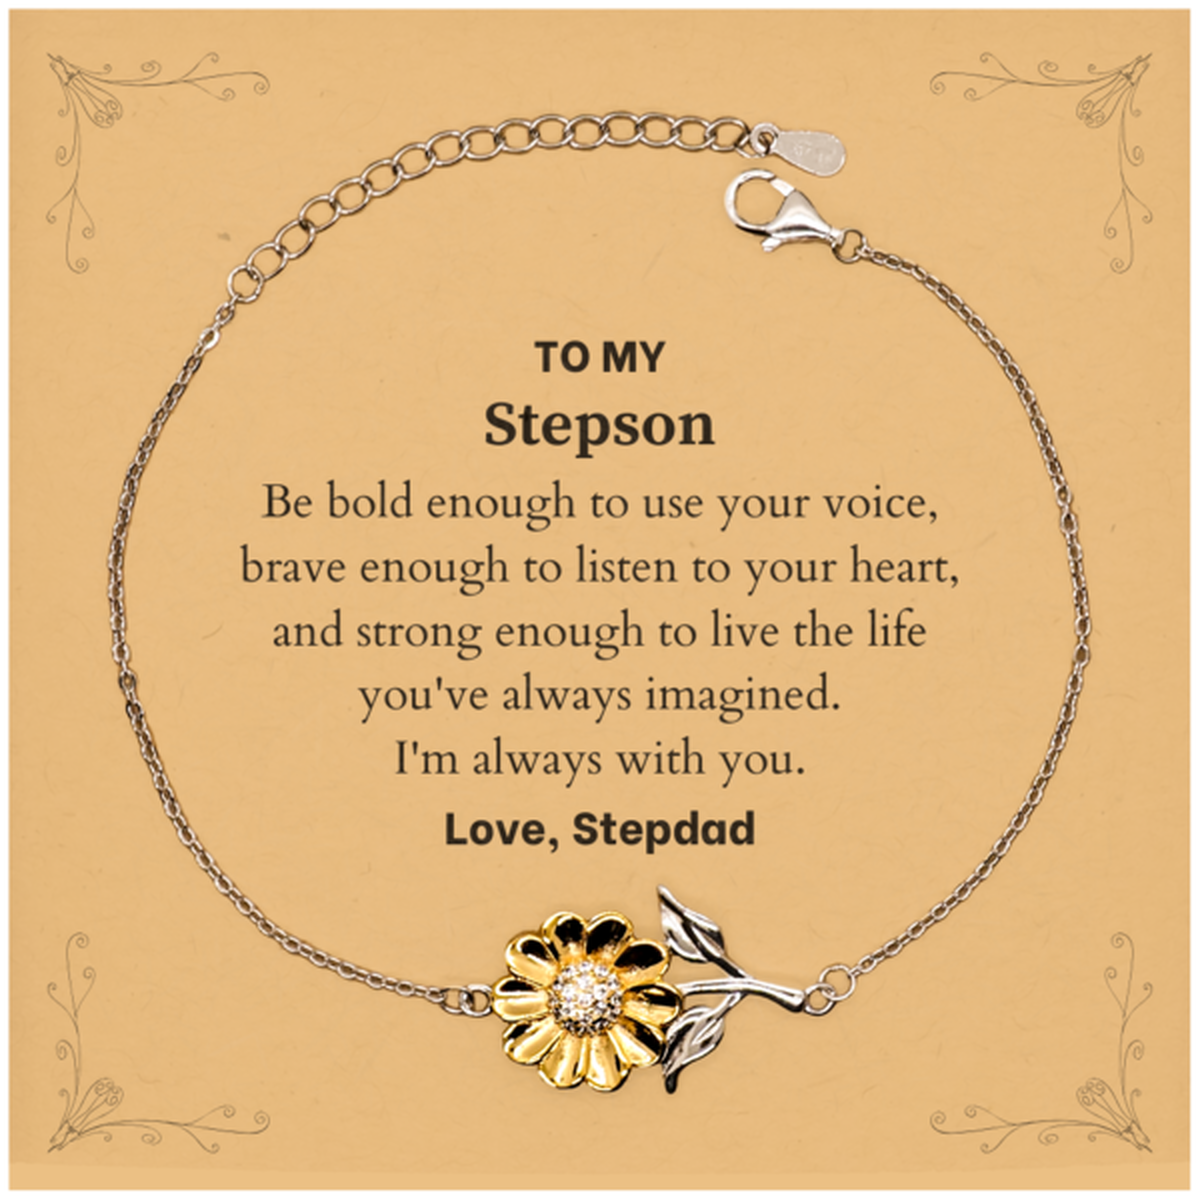 Keepsake Stepson Sunflower Bracelet Gift Idea Graduation Christmas Birthday Stepson from Stepdad, Stepson Be bold enough to use your voice, brave enough to listen to your heart. Love, Stepdad